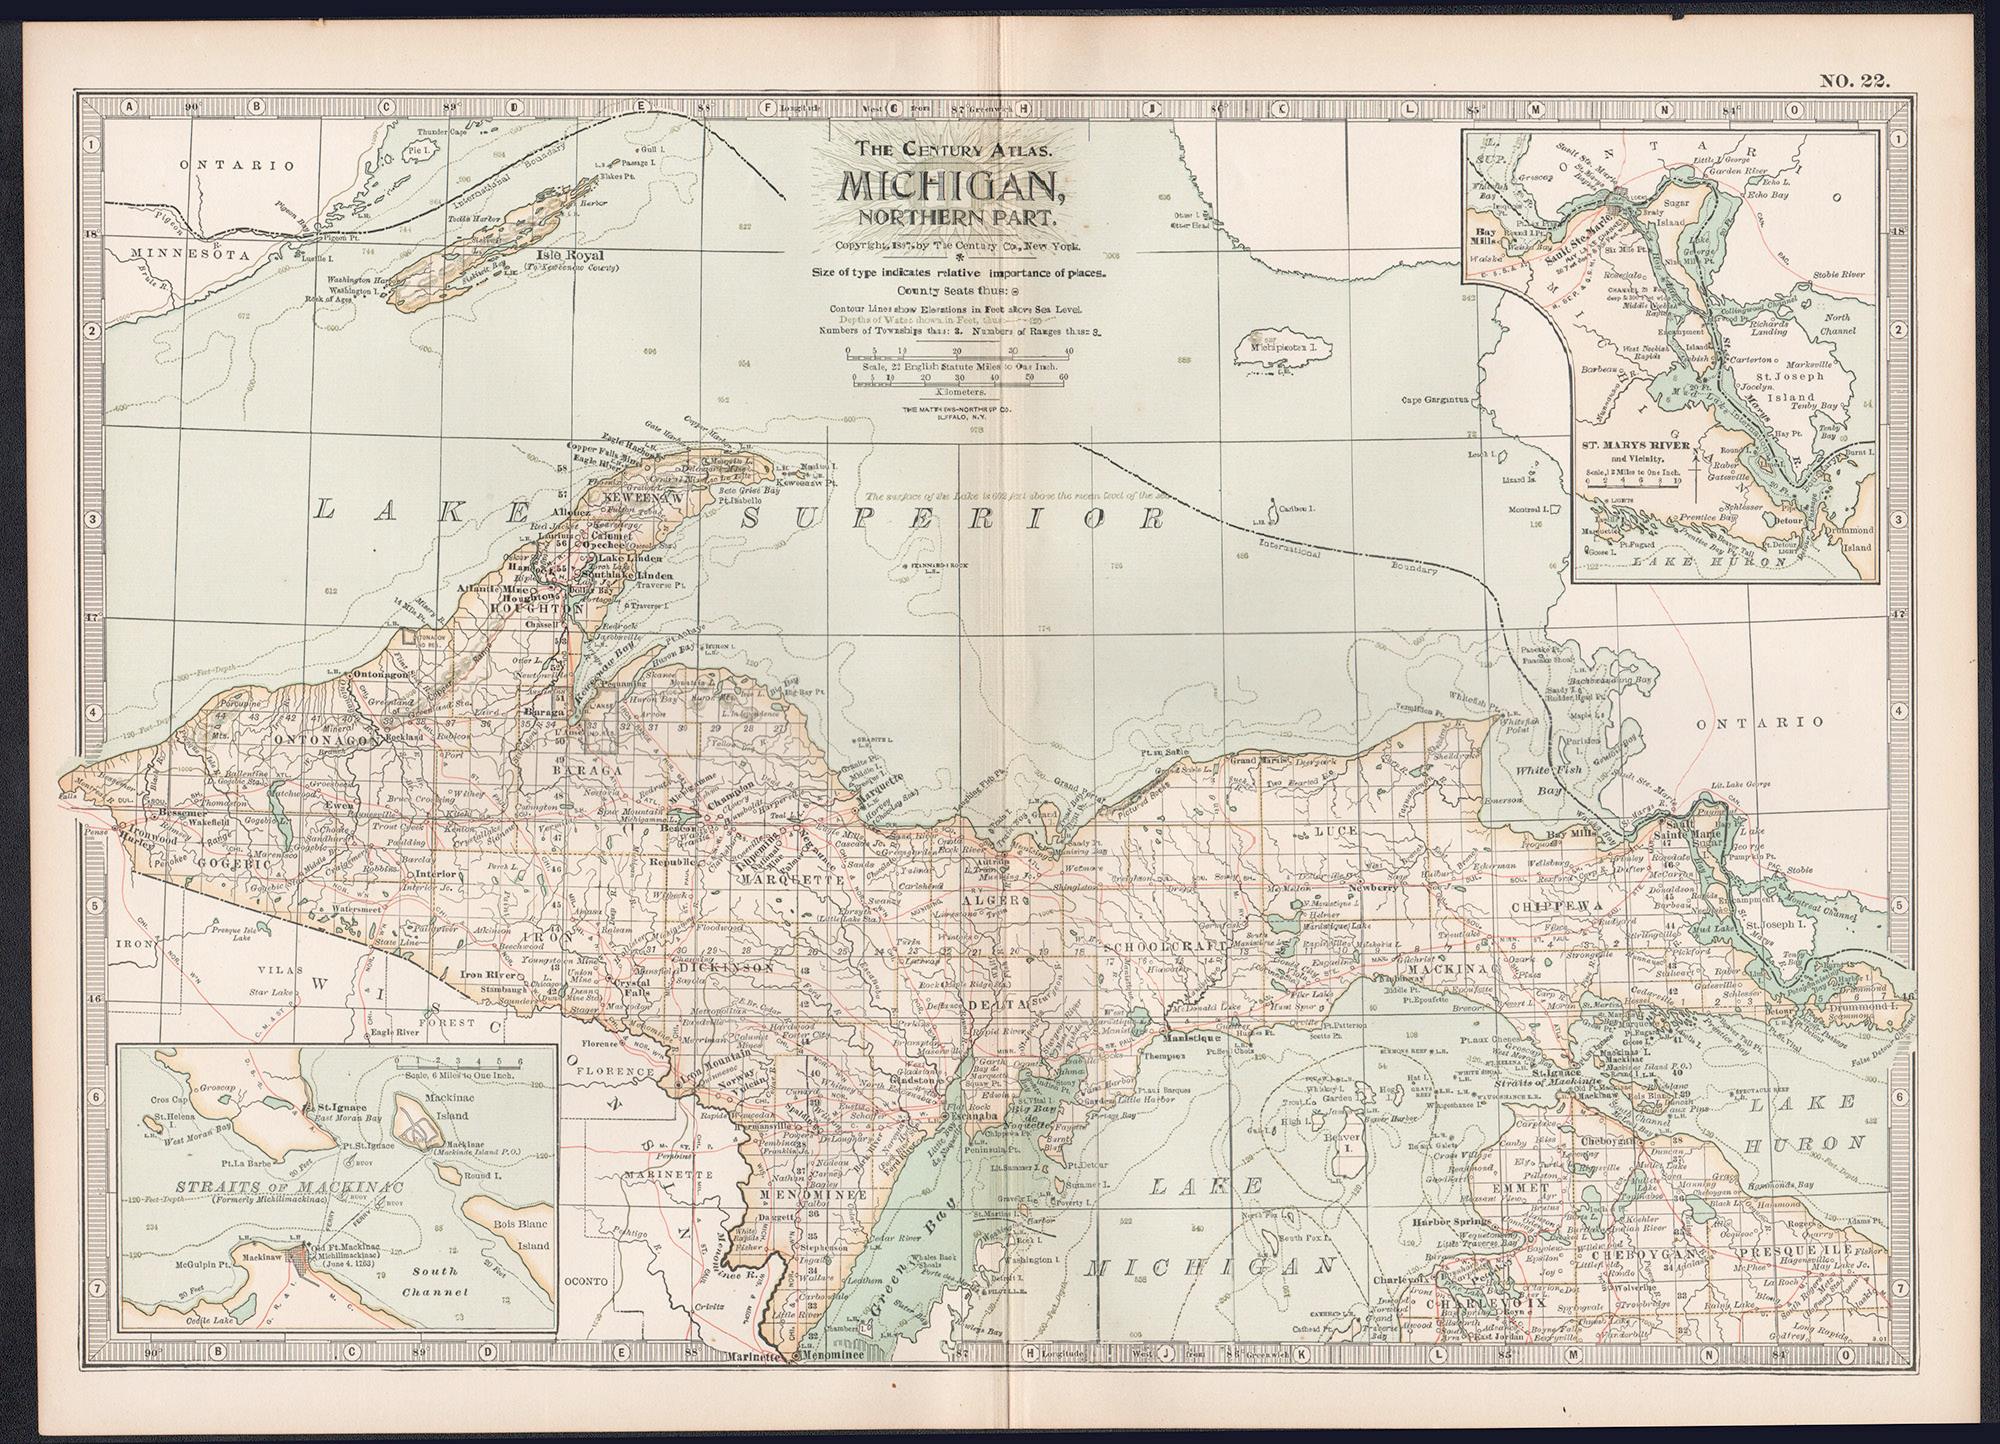 Michigan, Northern Part. USA. Century Atlas state antique vintage map - Print by Unknown